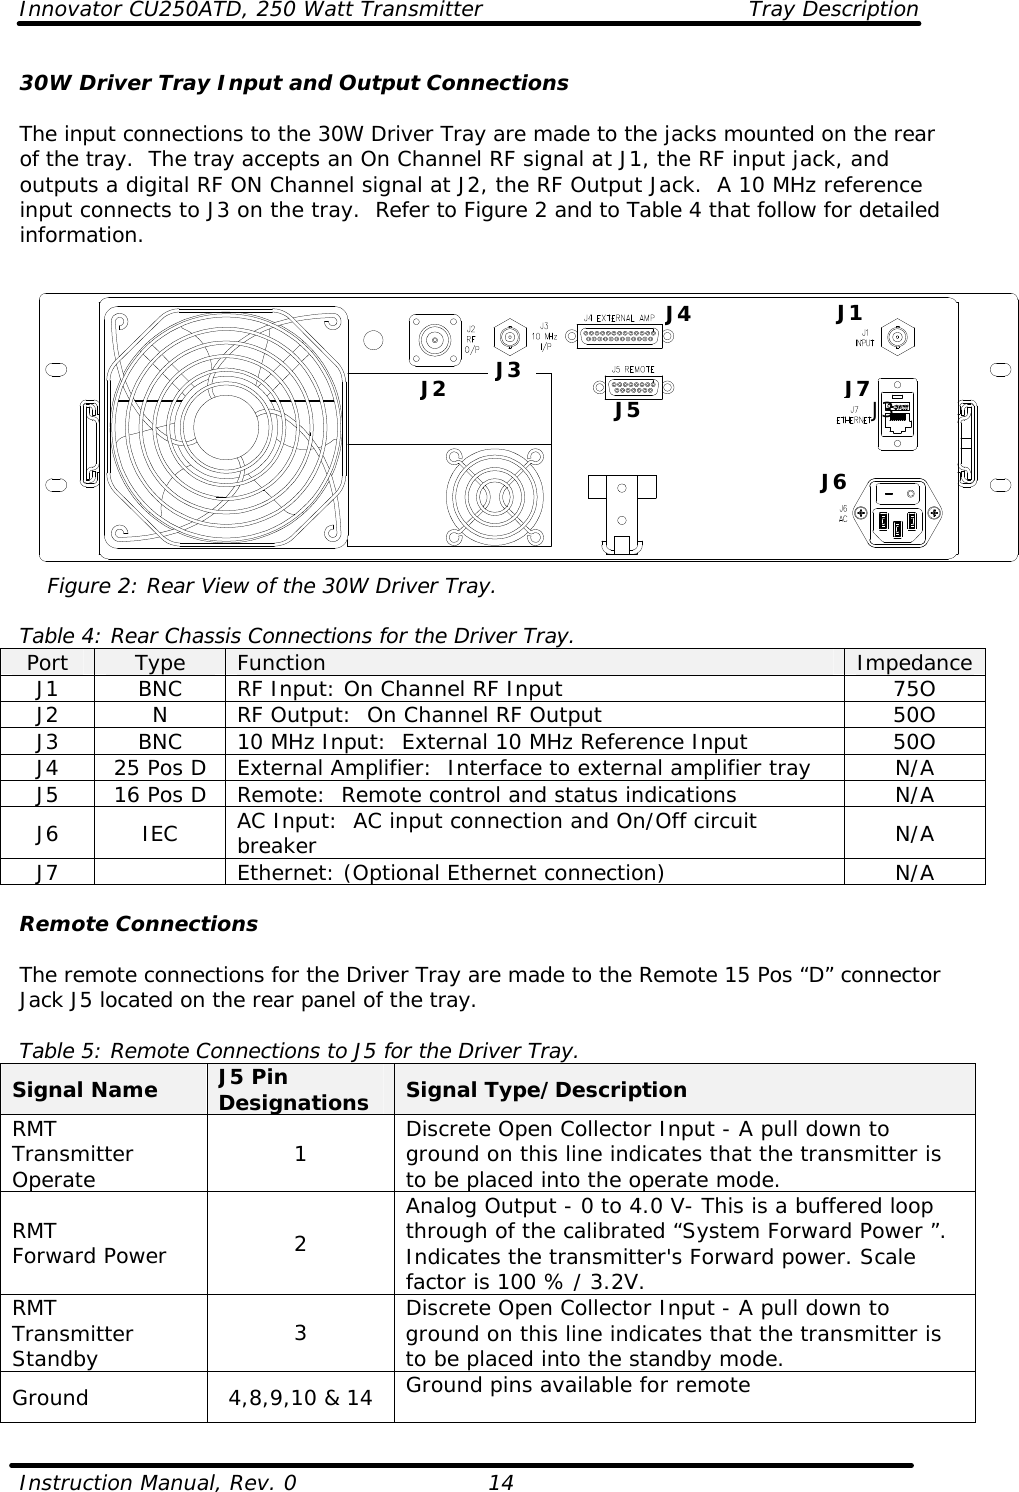 Innovator CU250ATD, 250 Watt Transmitter Tray Description  Instruction Manual, Rev. 0    14 30W Driver Tray Input and Output Connections  The input connections to the 30W Driver Tray are made to the jacks mounted on the rear of the tray.  The tray accepts an On Channel RF signal at J1, the RF input jack, and outputs a digital RF ON Channel signal at J2, the RF Output Jack.  A 10 MHz reference input connects to J3 on the tray.  Refer to Figure 2 and to Table 4 that follow for detailed information.       Figure 2: Rear View of the 30W Driver Tray.  Table 4: Rear Chassis Connections for the Driver Tray. Port Type Function Impedance J1 BNC RF Input: On Channel RF Input 75O J2 N RF Output:  On Channel RF Output 50O J3 BNC 10 MHz Input:  External 10 MHz Reference Input 50O J4 25 Pos D External Amplifier:  Interface to external amplifier tray N/A J5 16 Pos D Remote:  Remote control and status indications N/A J6 IEC AC Input:  AC input connection and On/Off circuit breaker N/A J7    Ethernet: (Optional Ethernet connection) N/A  Remote Connections  The remote connections for the Driver Tray are made to the Remote 15 Pos “D” connector Jack J5 located on the rear panel of the tray.   Table 5: Remote Connections to J5 for the Driver Tray. Signal Name J5 Pin Designations Signal Type/Description RMT Transmitter Operate 1 Discrete Open Collector Input - A pull down to ground on this line indicates that the transmitter is to be placed into the operate mode. RMT Forward Power 2 Analog Output - 0 to 4.0 V- This is a buffered loop through of the calibrated “System Forward Power ”.  Indicates the transmitter&apos;s Forward power. Scale factor is 100 % / 3.2V. RMT Transmitter Standby 3 Discrete Open Collector Input - A pull down to ground on this line indicates that the transmitter is to be placed into the standby mode. Ground 4,8,9,10 &amp; 14 Ground pins available for remote  J4   J5  J1J7   J6 J3  J2  J3 